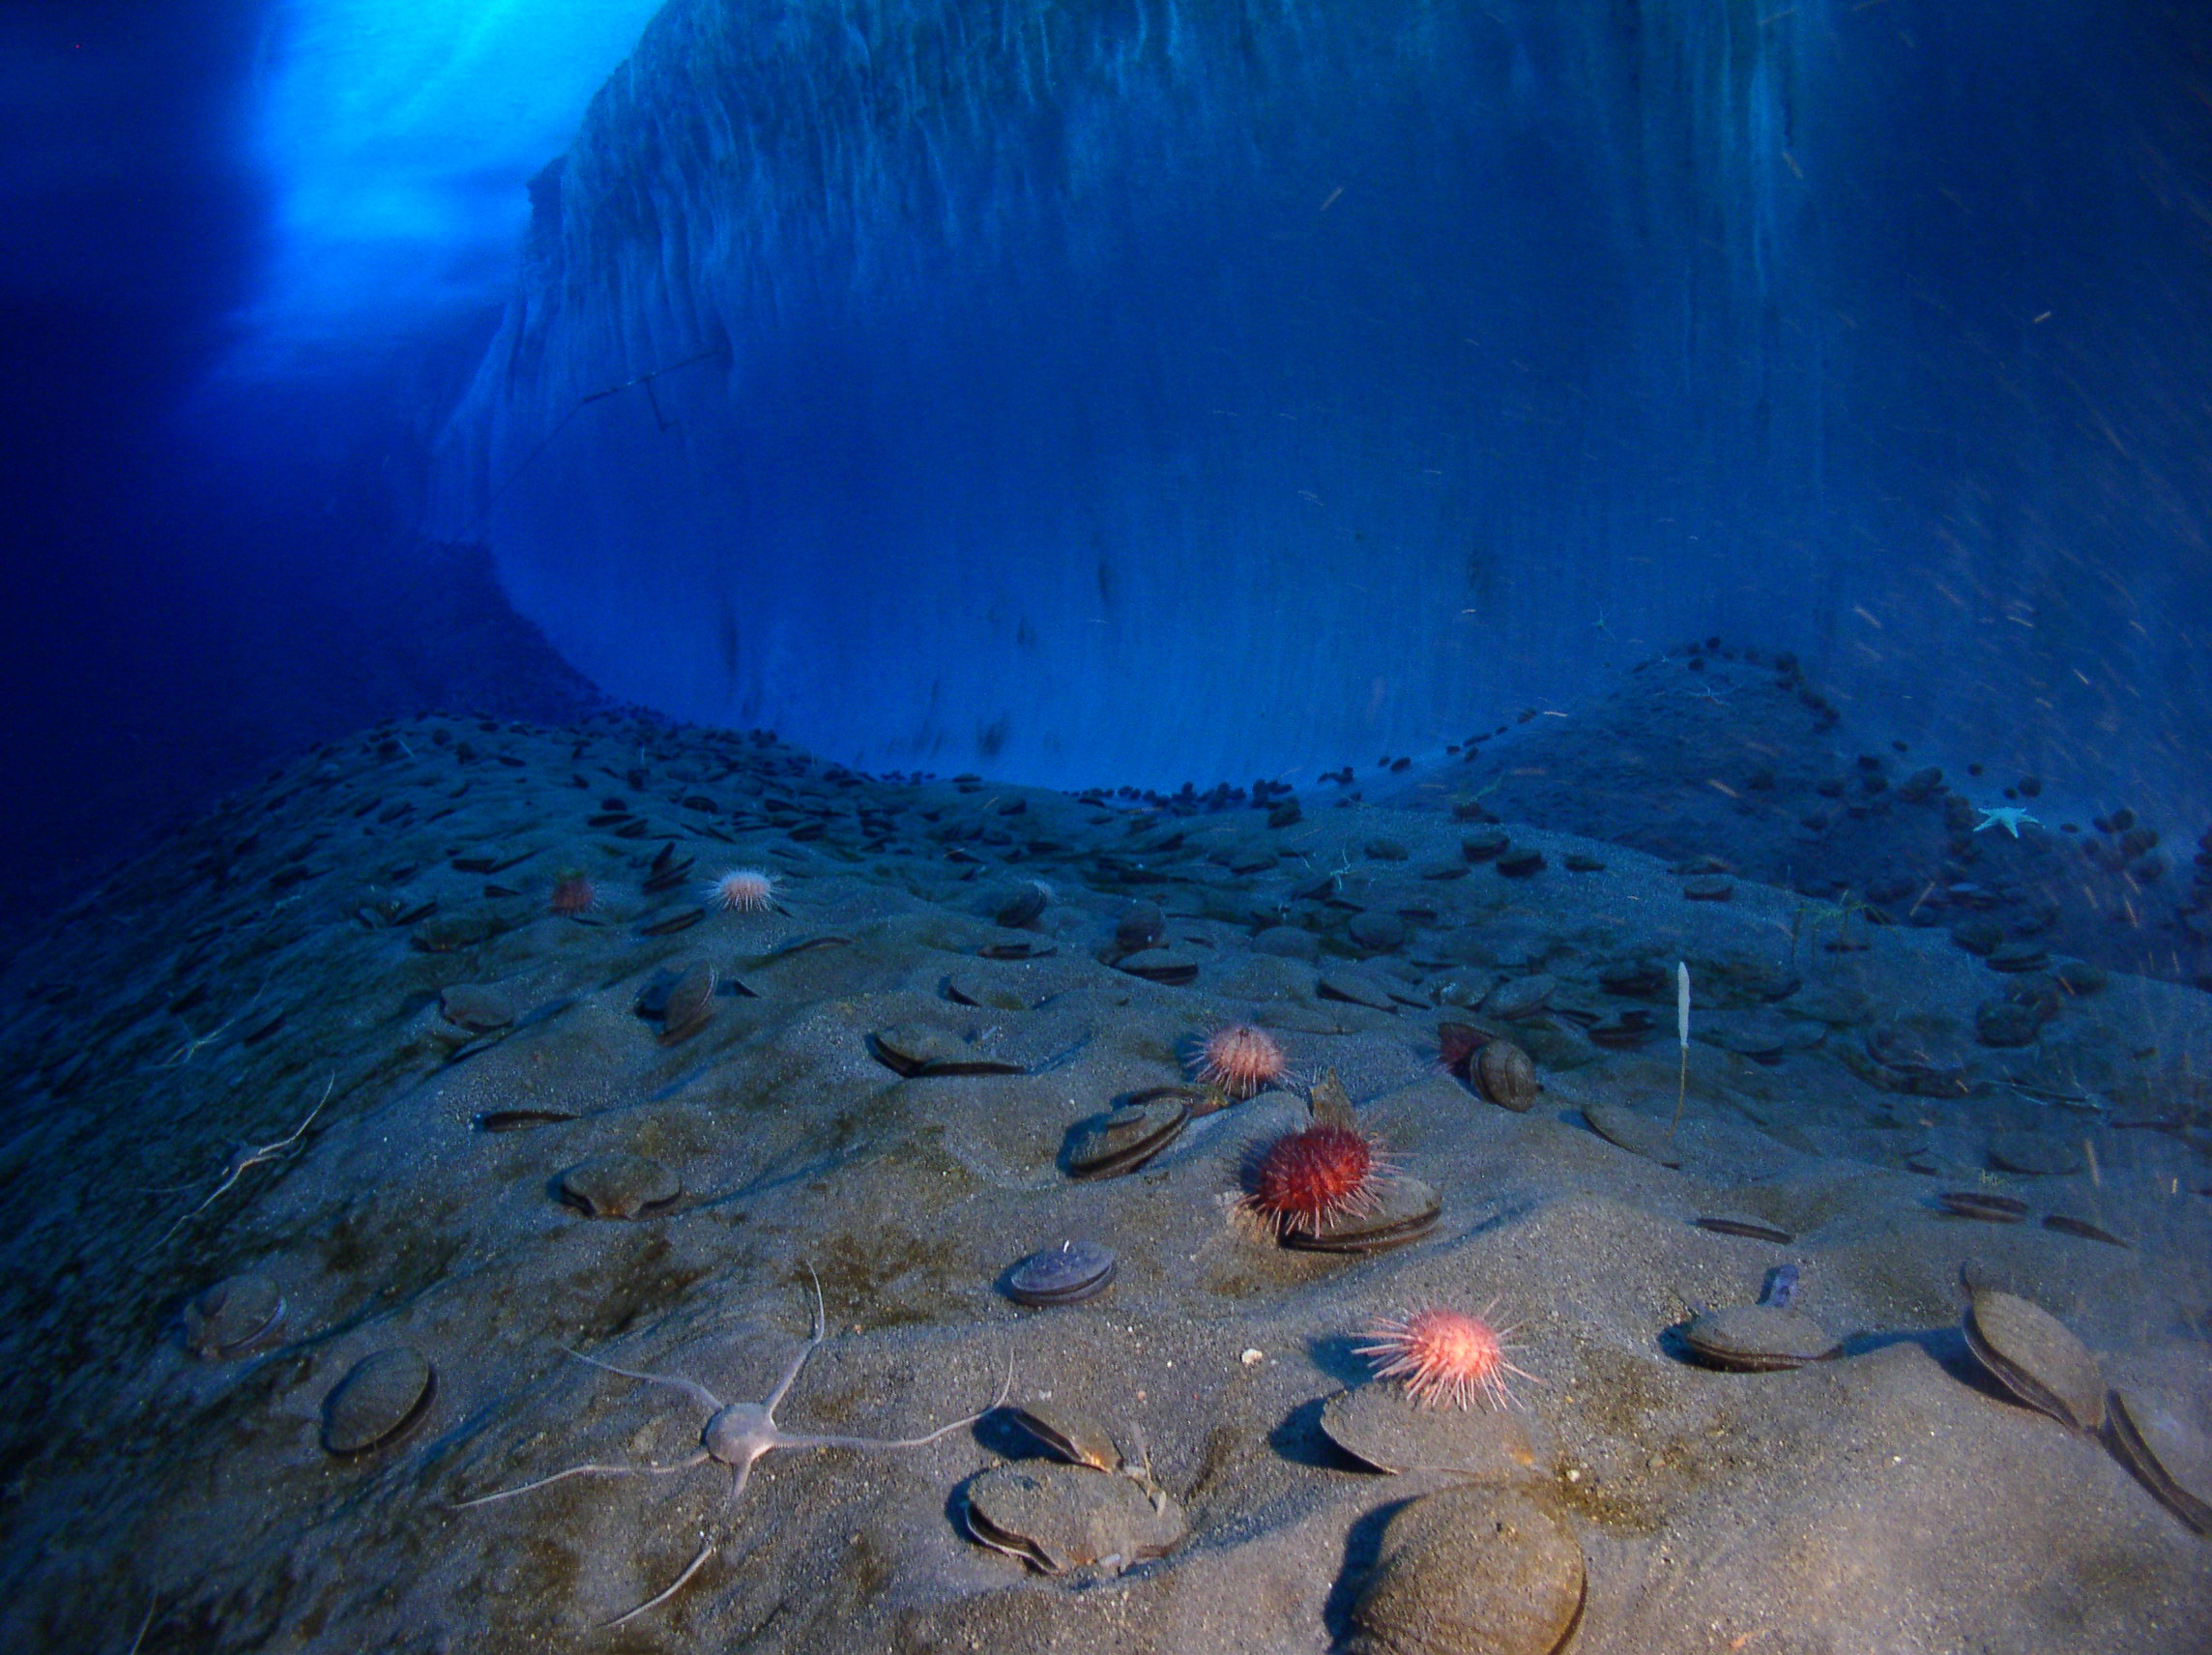 Seafloor organisms rest near a wall of ice under water.